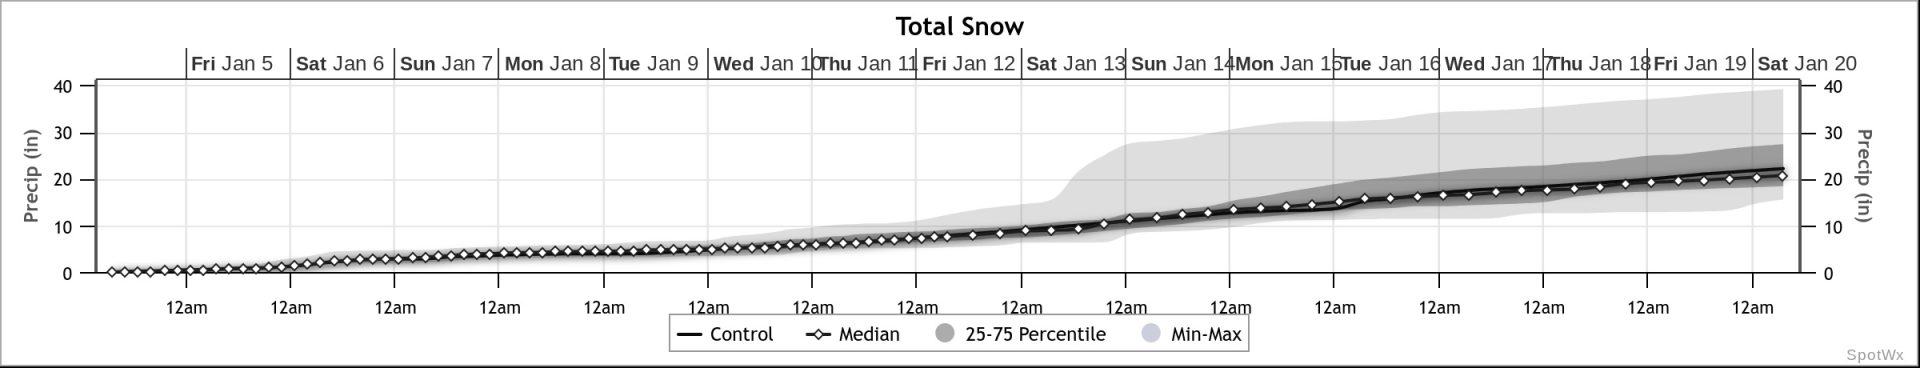 snow forecast for mount bohemia, showing up to 17 inches by opening day